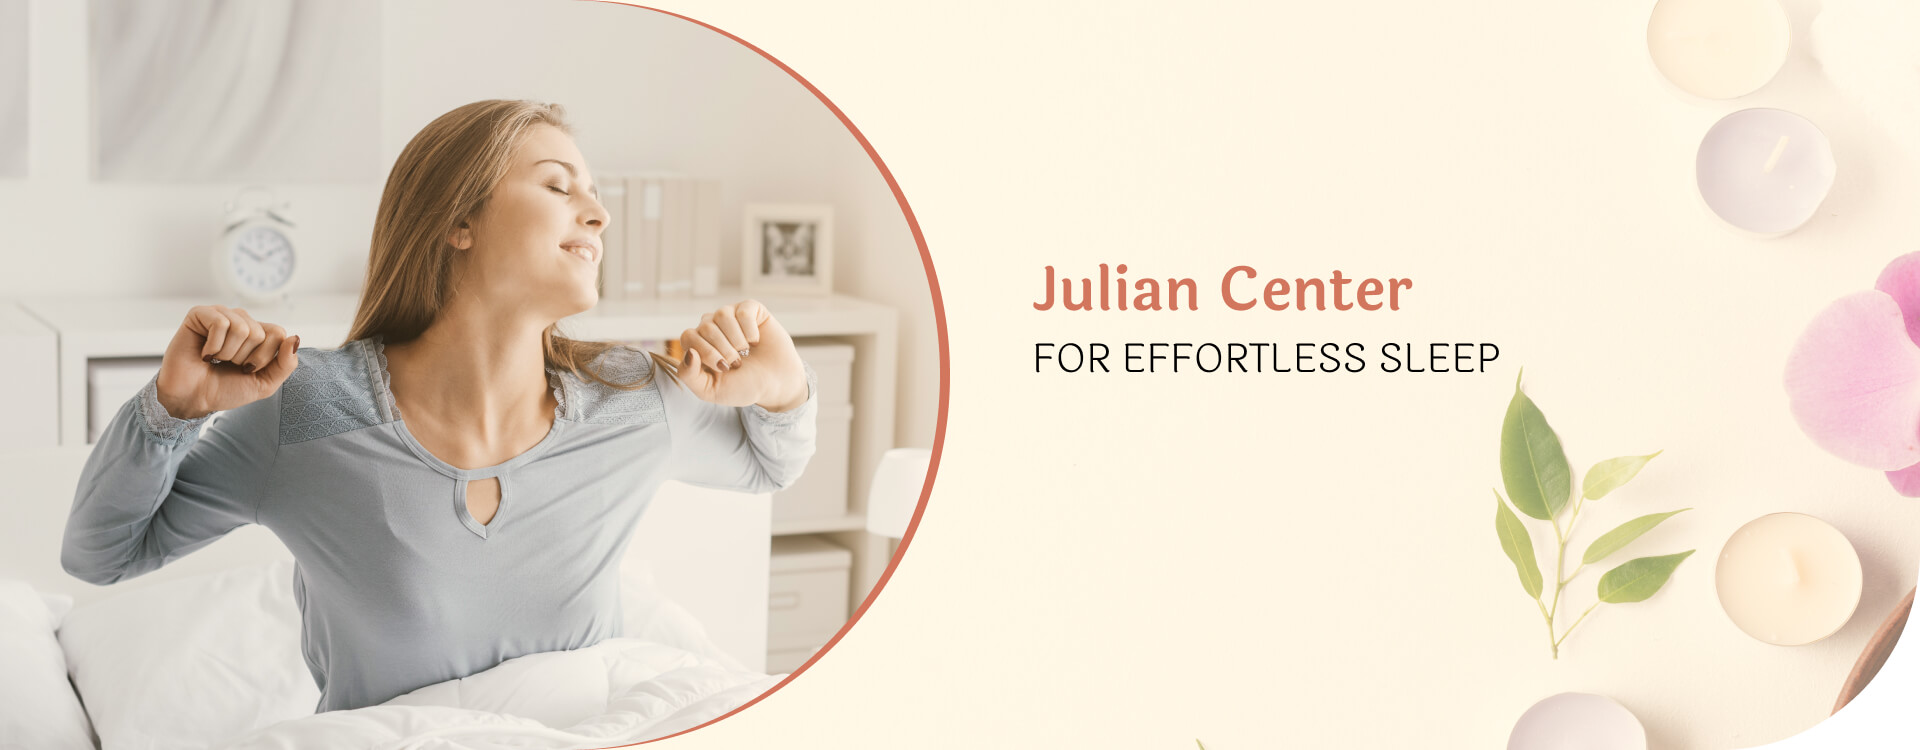 A woman just waking up, stretching - Julian Center for Effortless Sleep